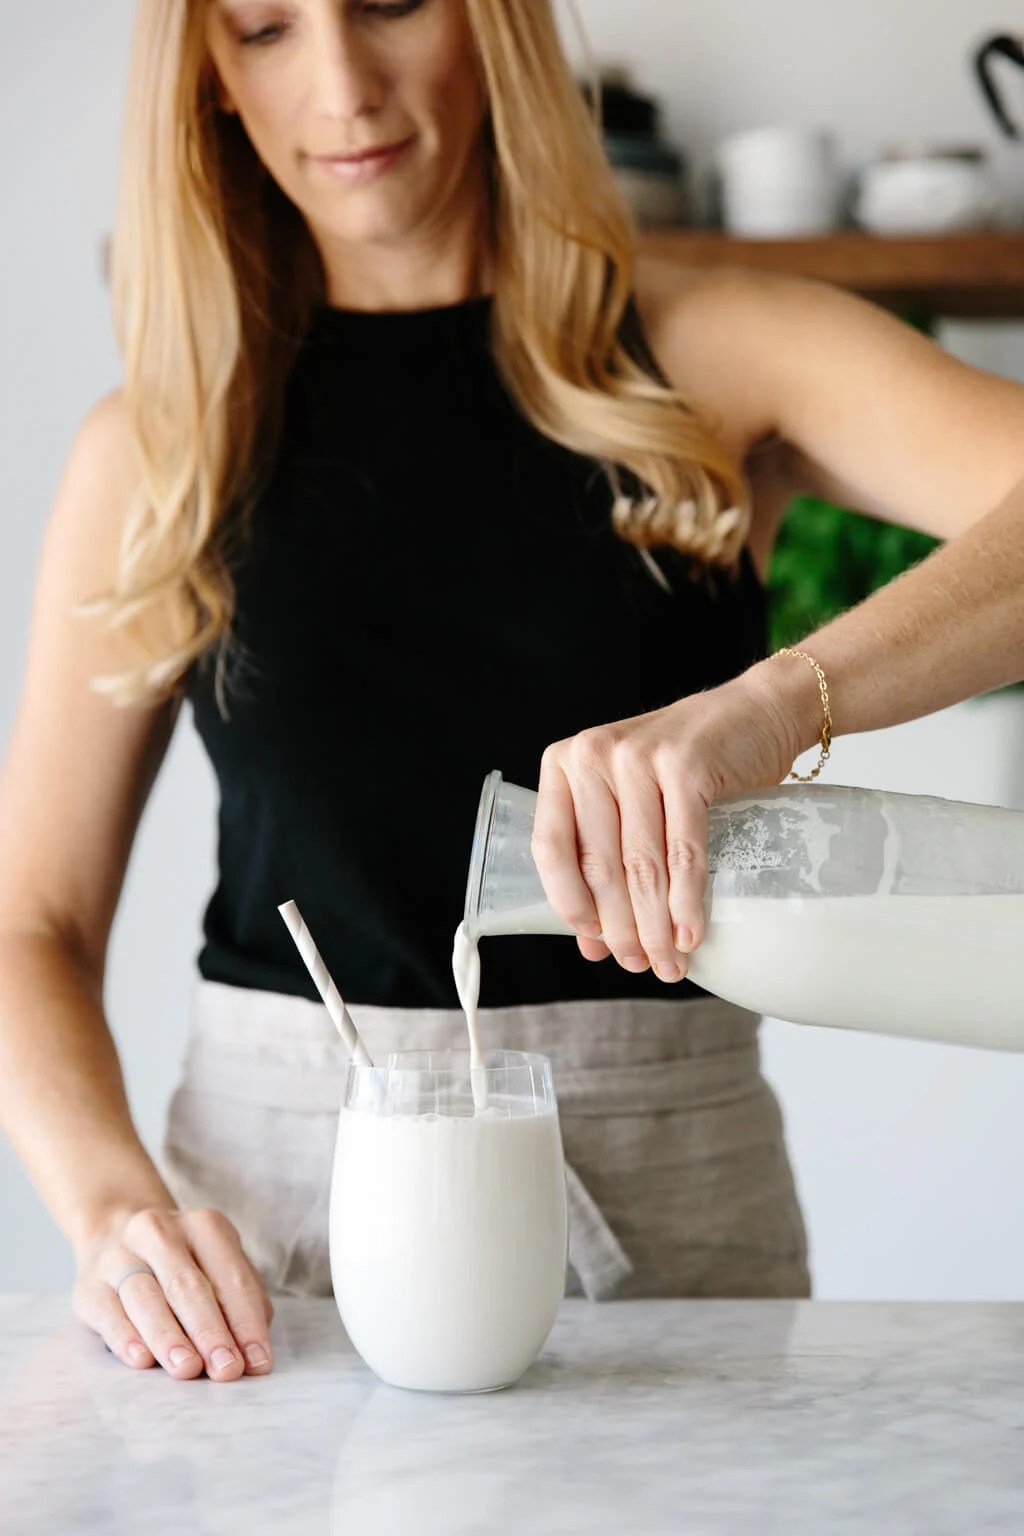 Cashew milk being poured into a glass